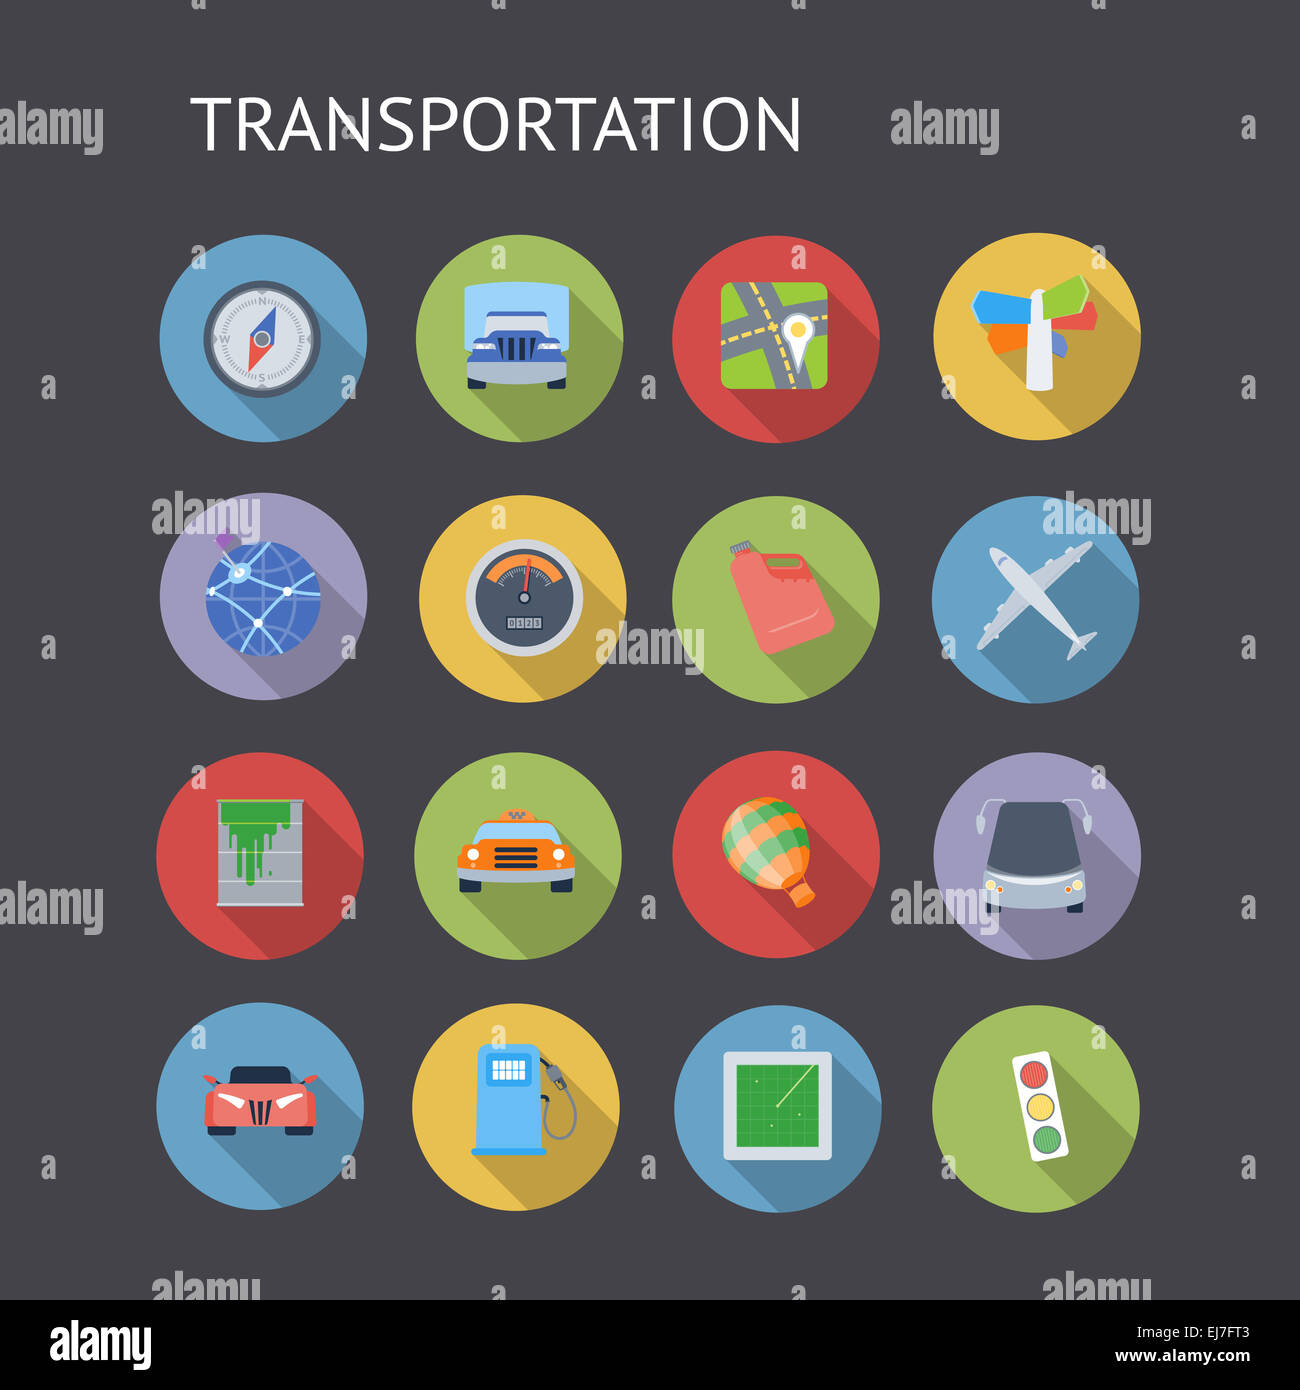 Flat Icons For Transportation Stock Photo